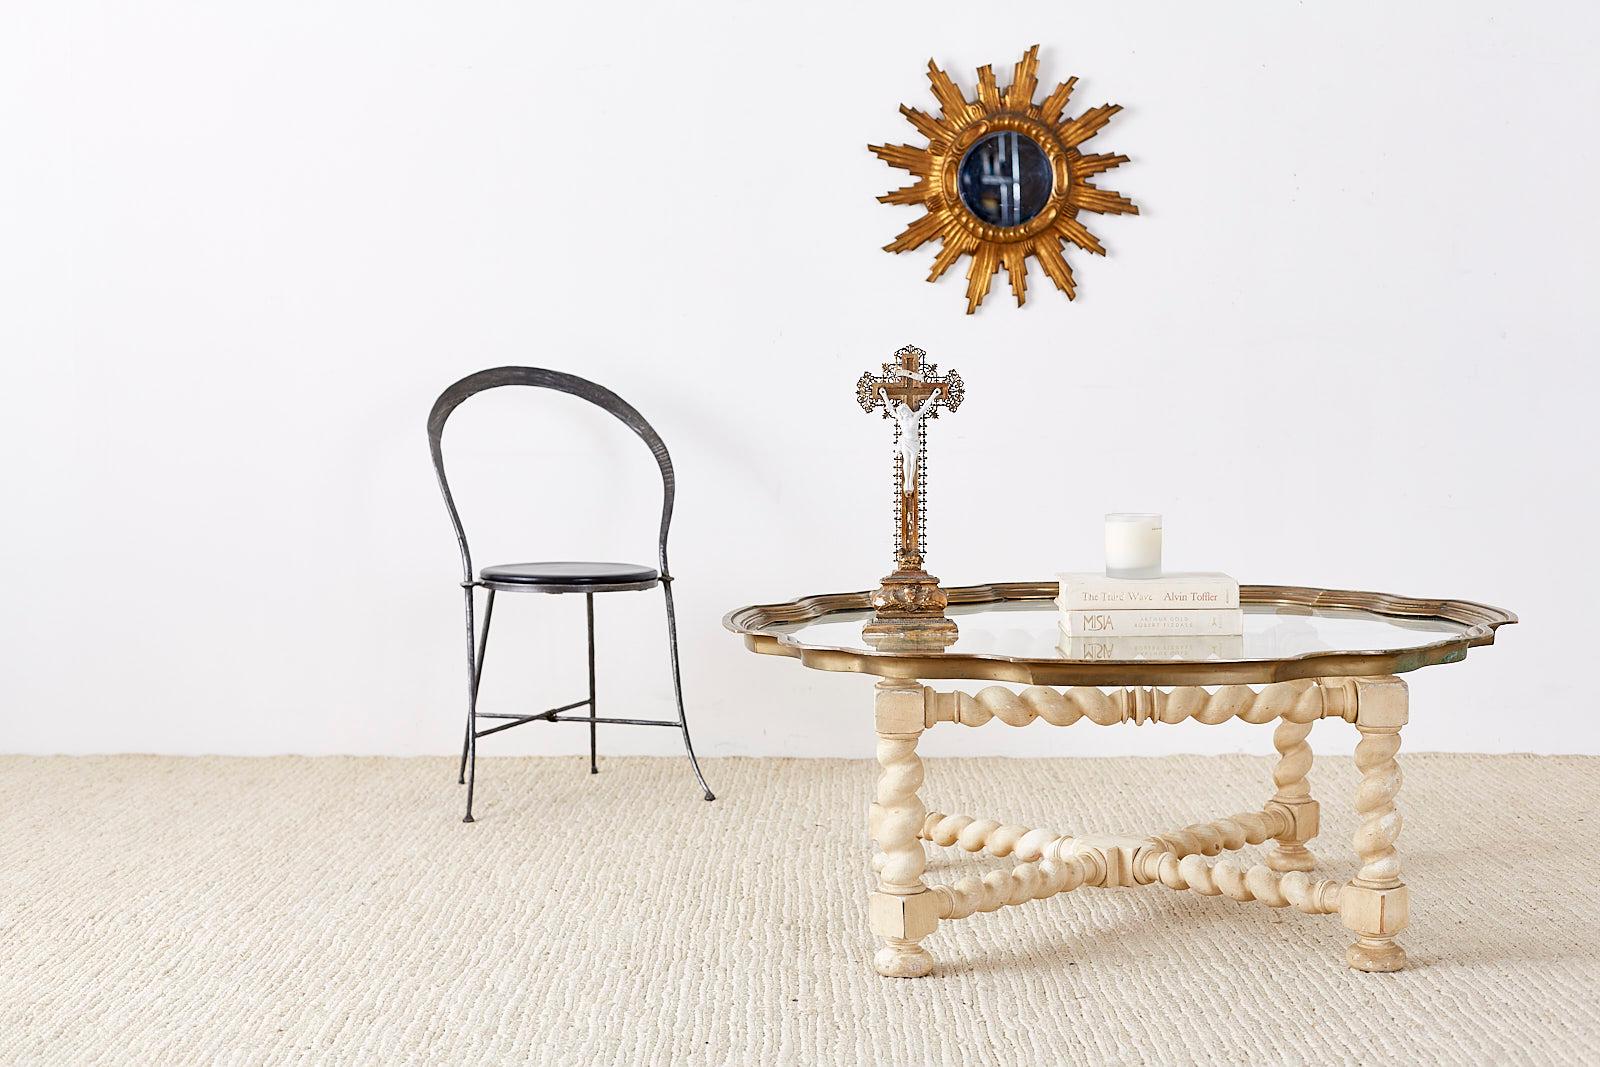 Hollywood Regency coffee table or cocktail table from Baker Furniture's Collector Edition. Features a white-washed oak barley twist base frame. The large brass tray top features a pie crust or scalloped edge inset with a pane of glass. The base is